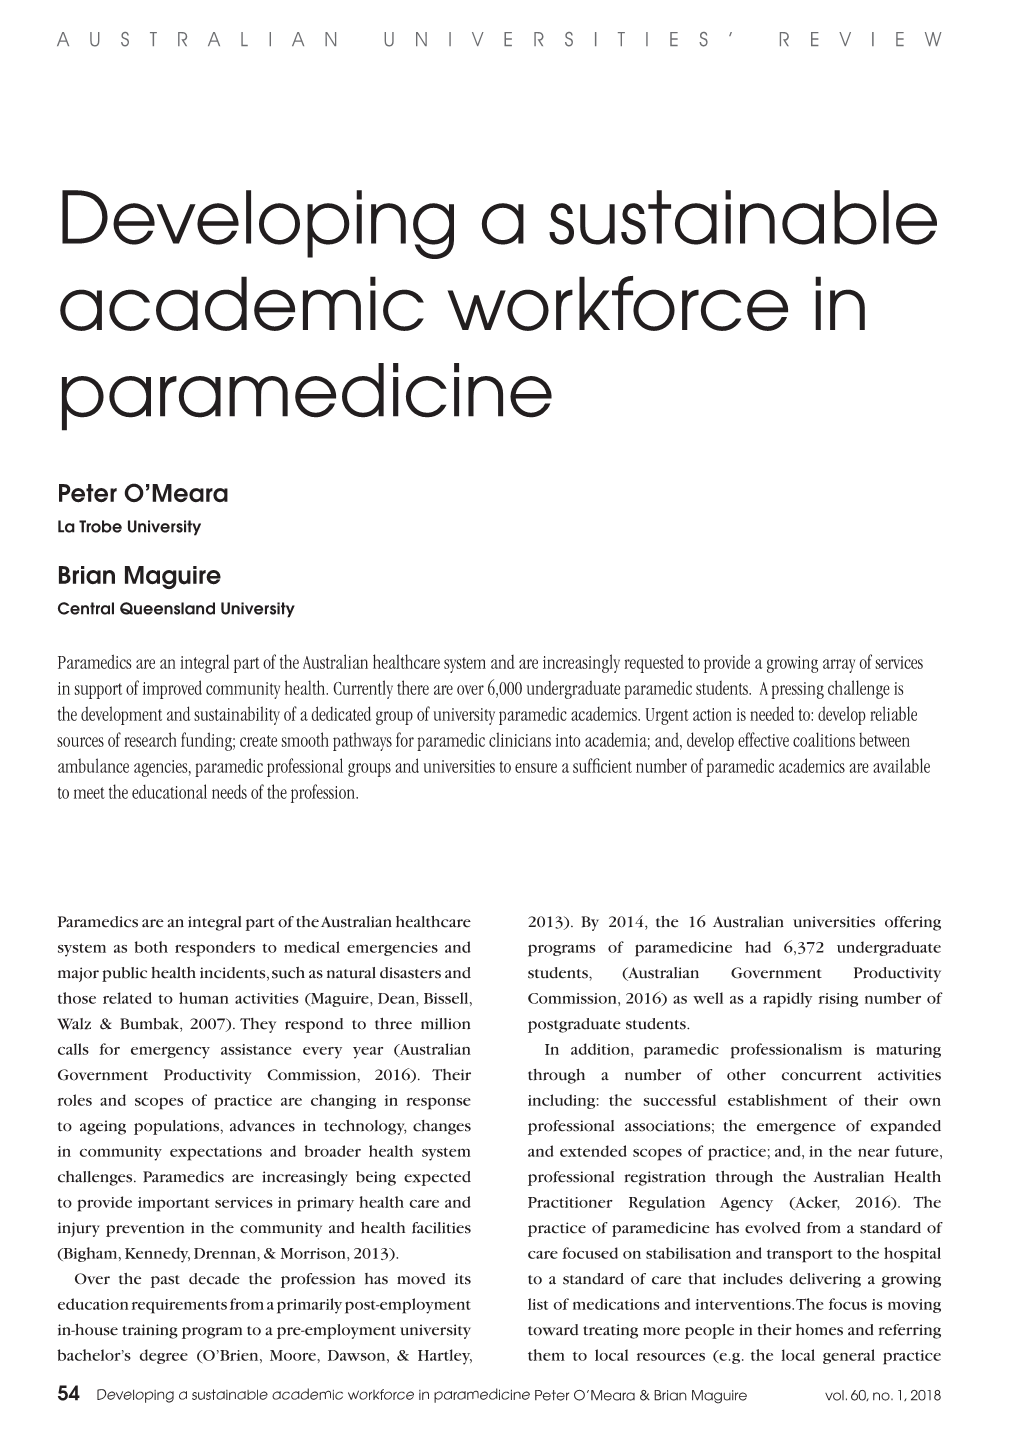 Developing a Sustainable Academic Workforce in Paramedicine